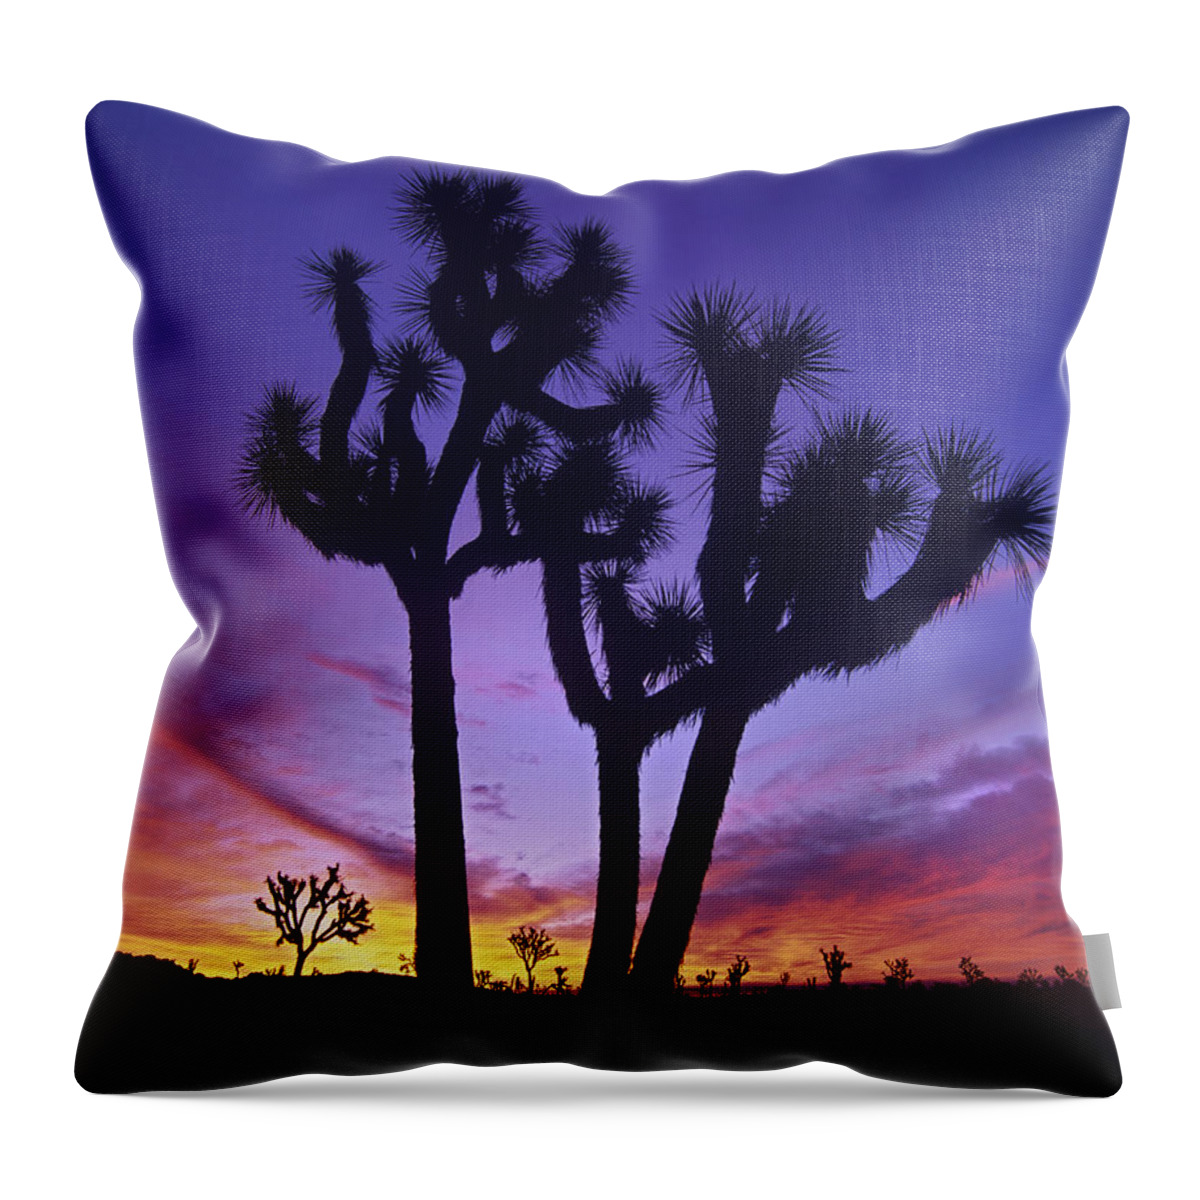 00175823 Throw Pillow featuring the photograph Joshua Tree Group At Sunrise Near Quail by Tim Fitzharris